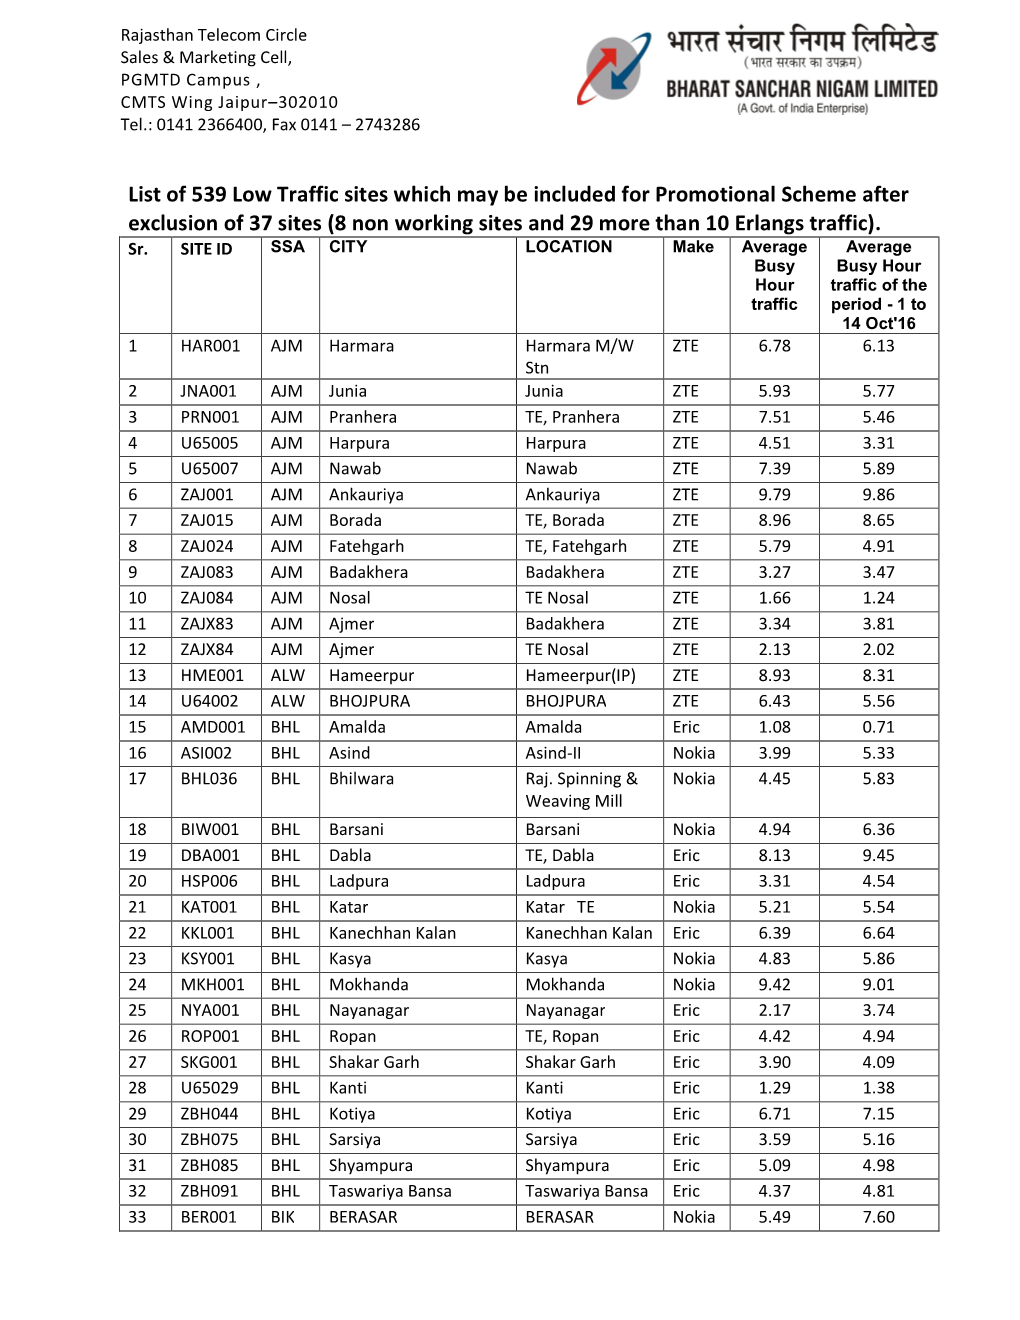 List of 539 Low Traffic Sites Which May Be Included for Promotional Scheme After Exclusion of 37 Sites (8 Non Working Sites and 29 More Than 10 Erlangs Traffic)